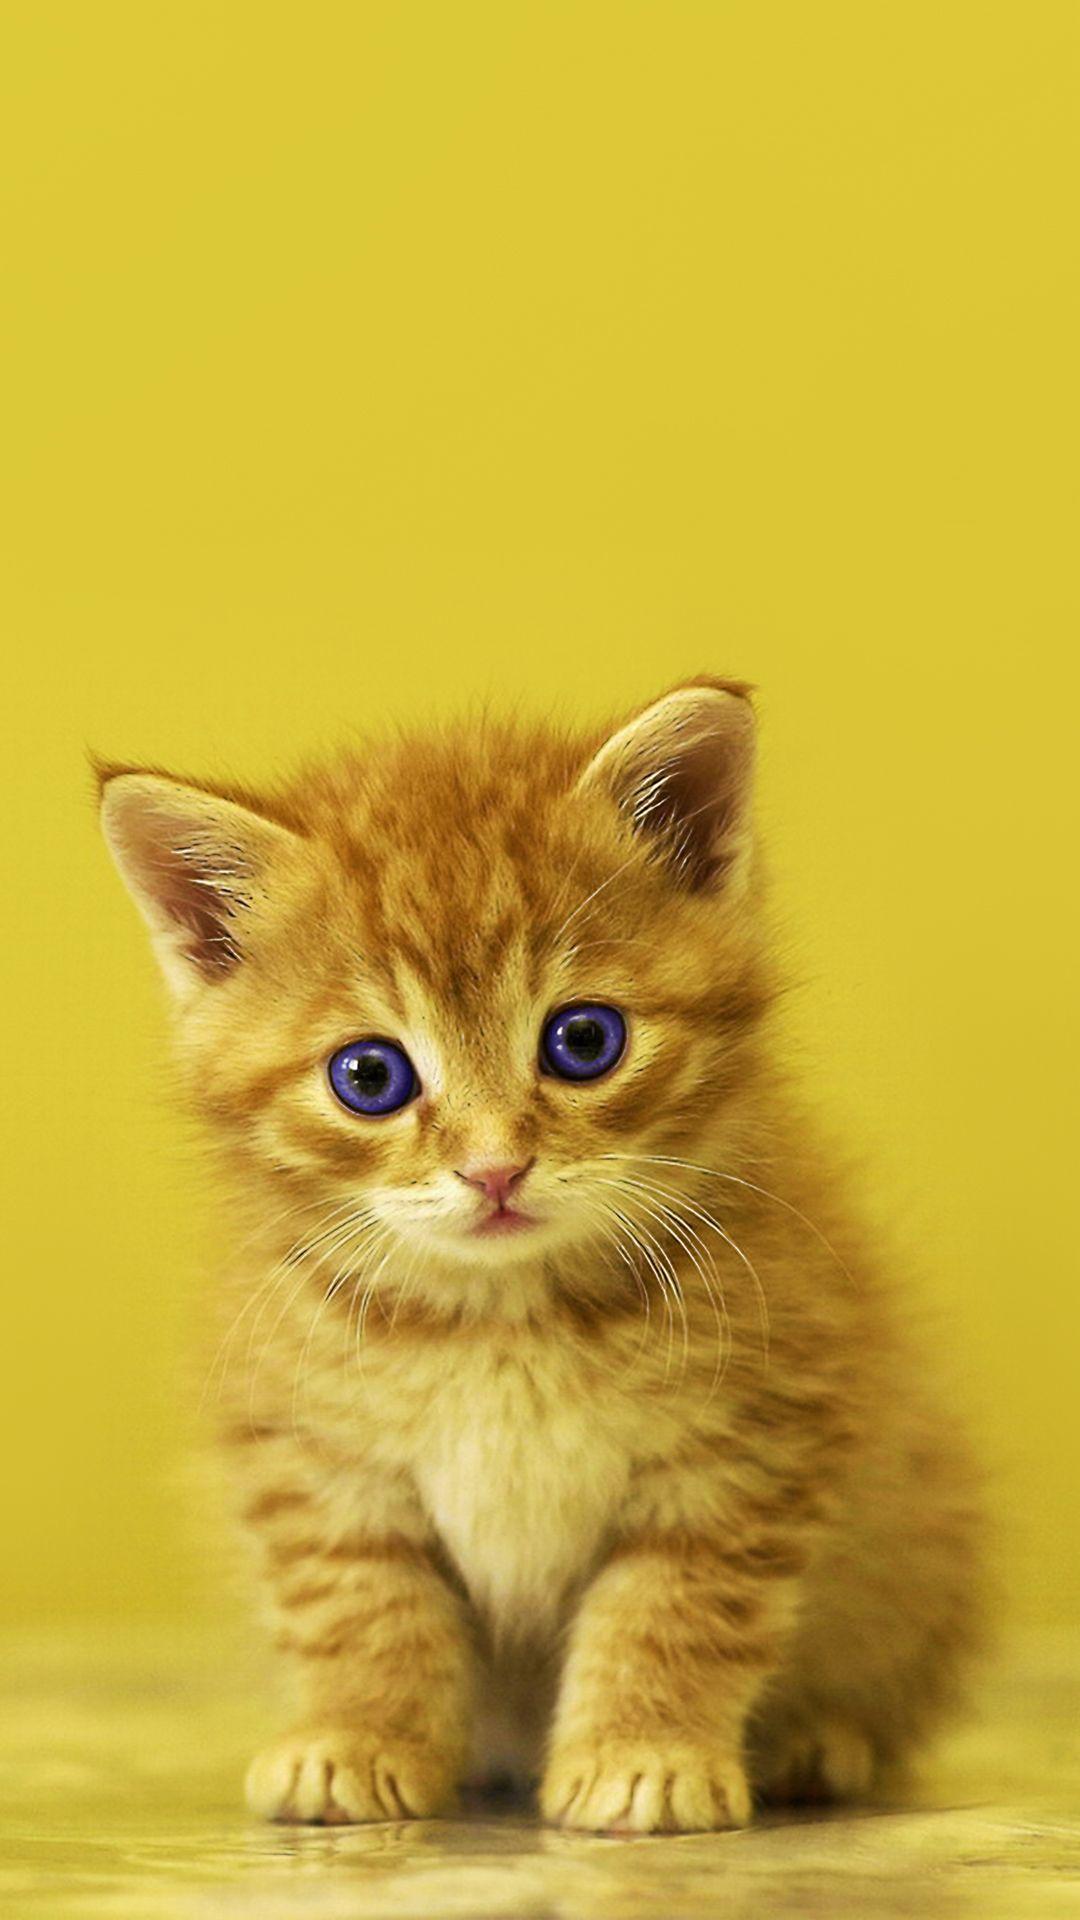 Baby Kitten HD Wallpaper For Your Mobile Phone